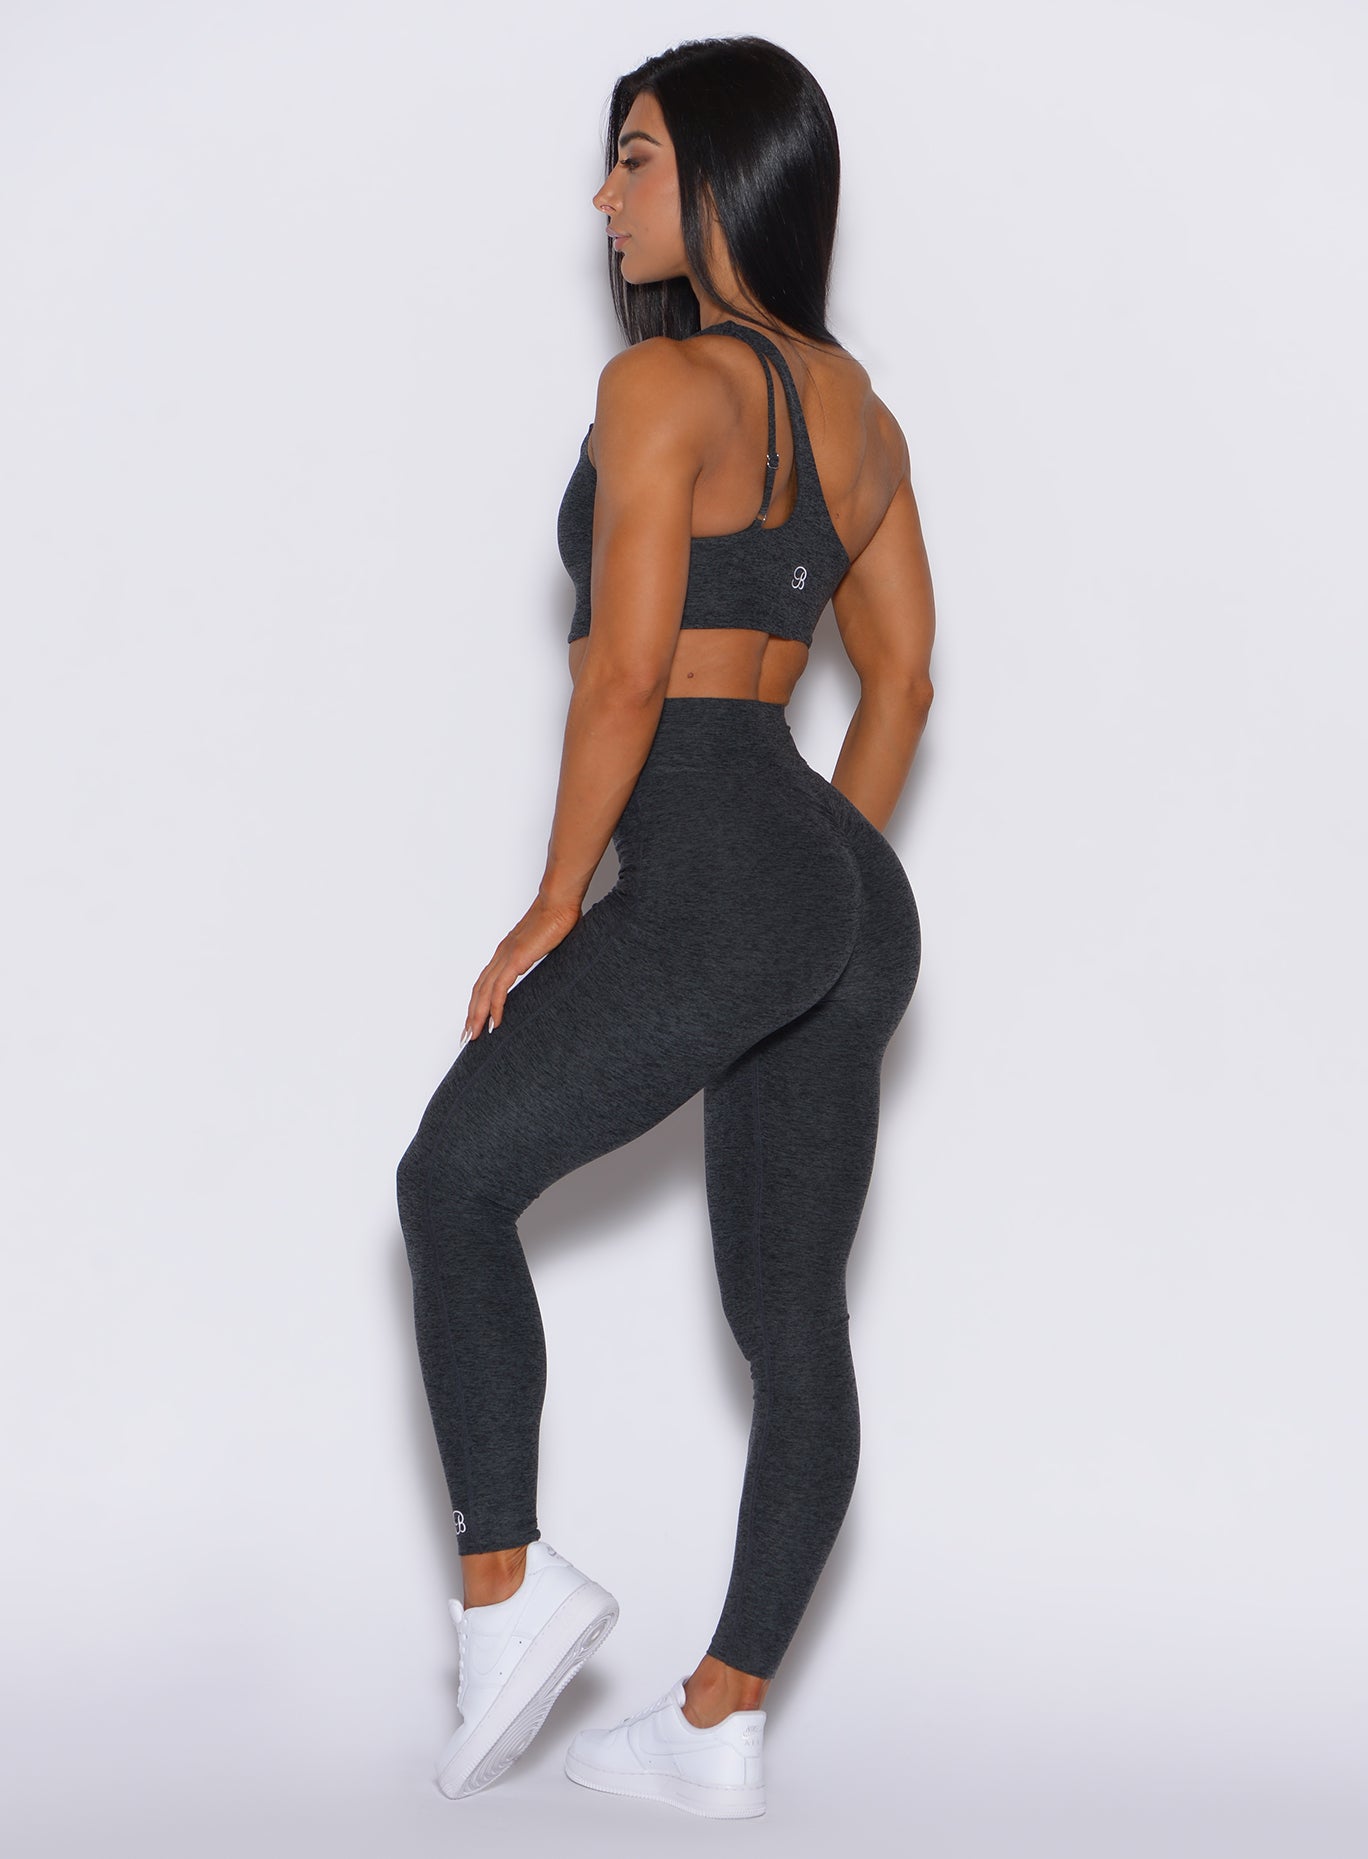 left side profile view of a model wearing our v active leggings in charcoal color along with the matching high rise bottom 